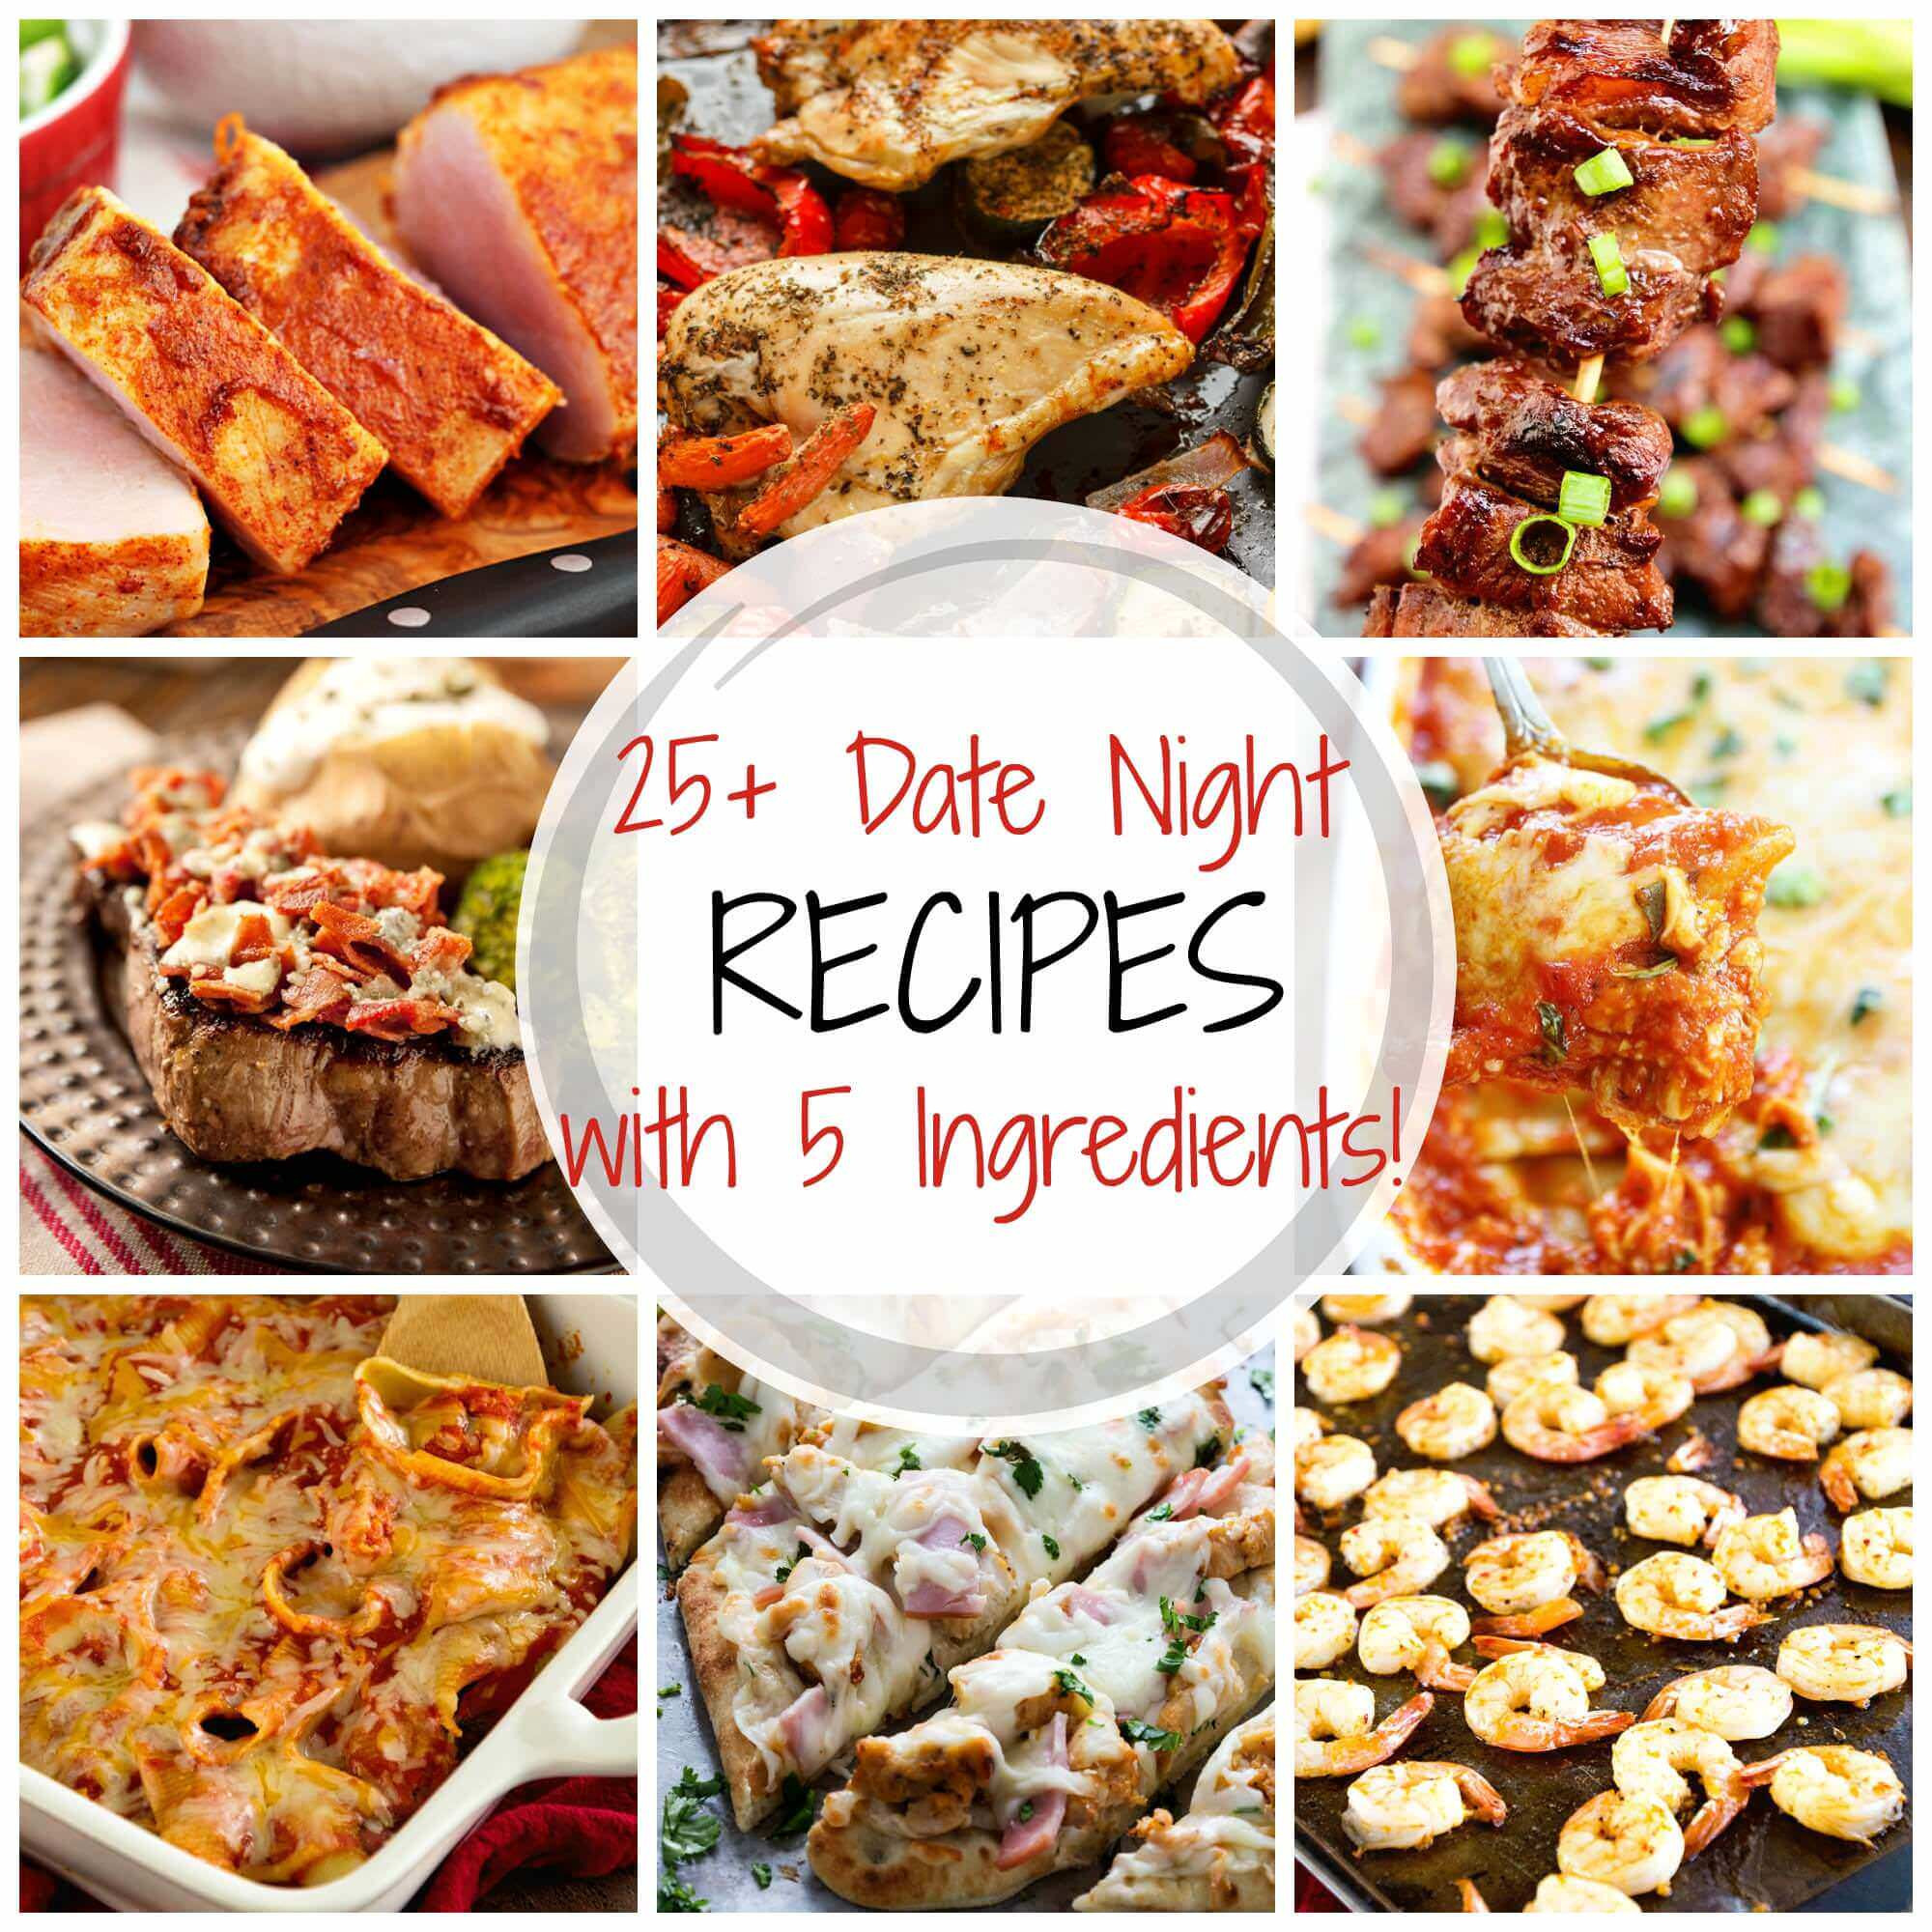 Fun Saturday Night Dinner Ideas
 25 Delicious Date Night Recipes with 5 Ingre nts or